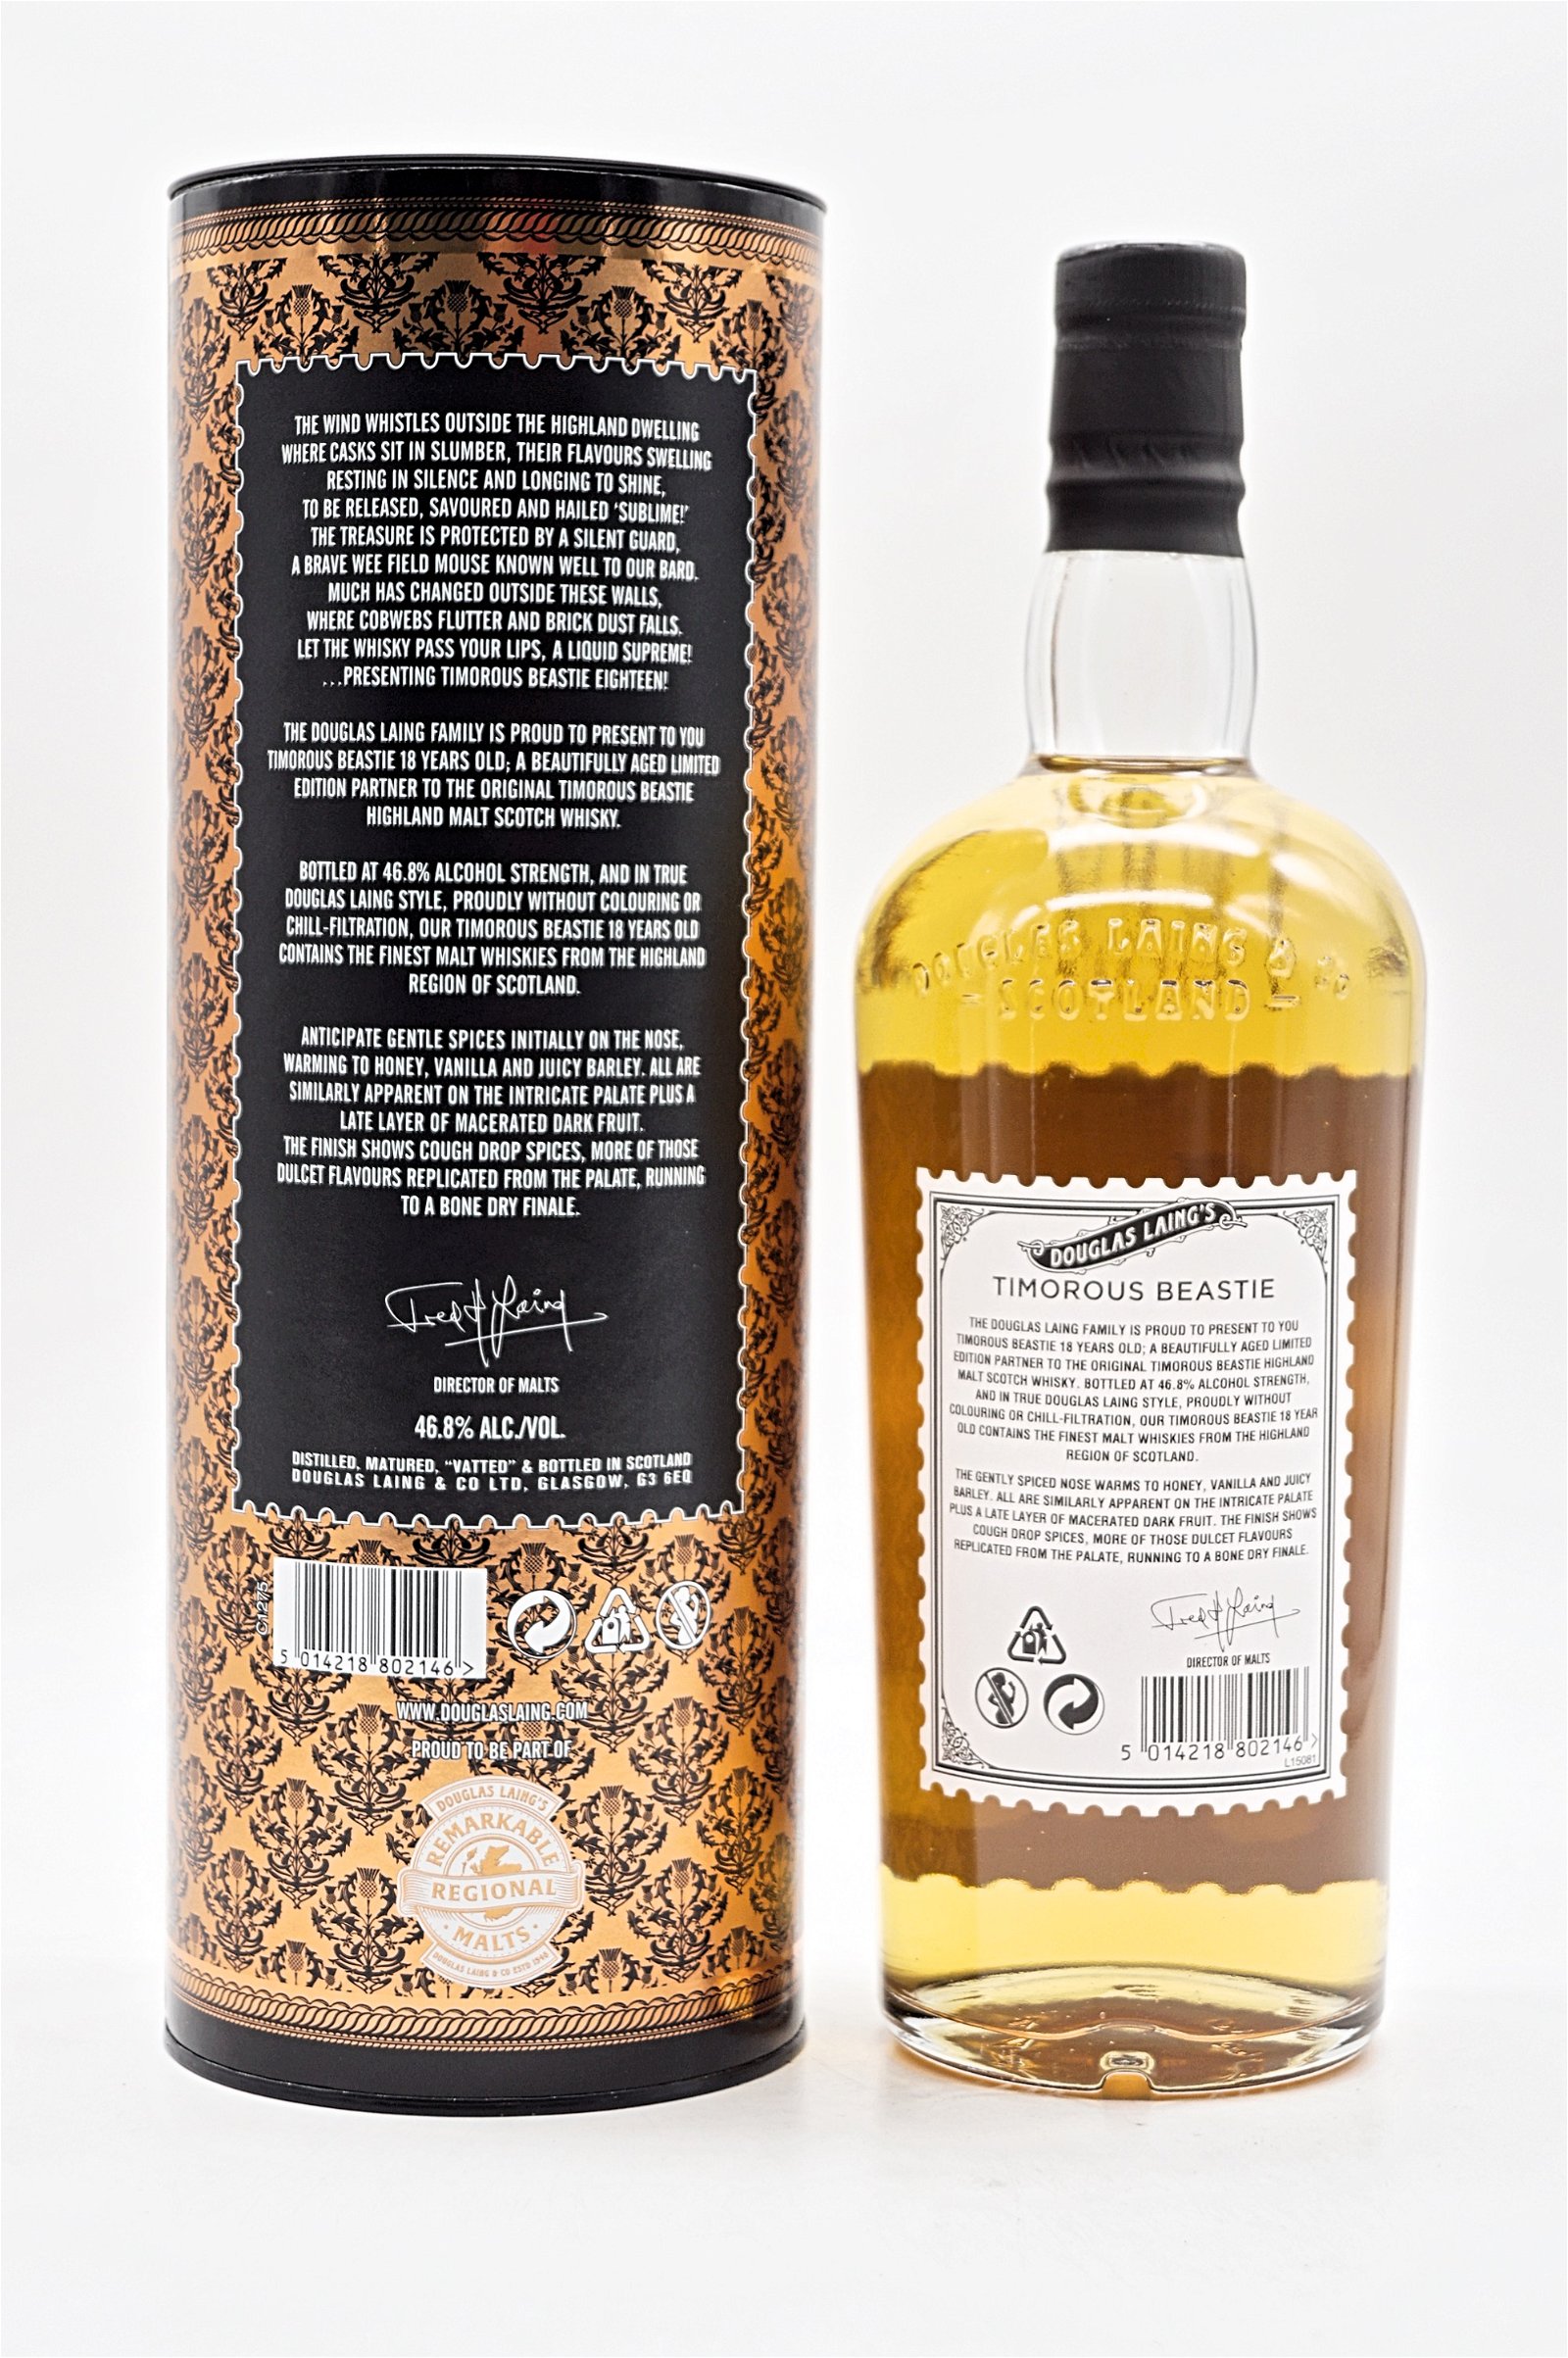 Timorous Beastie 18 Jahre Limited Edition Highland Blended Malt Scotch Whisky